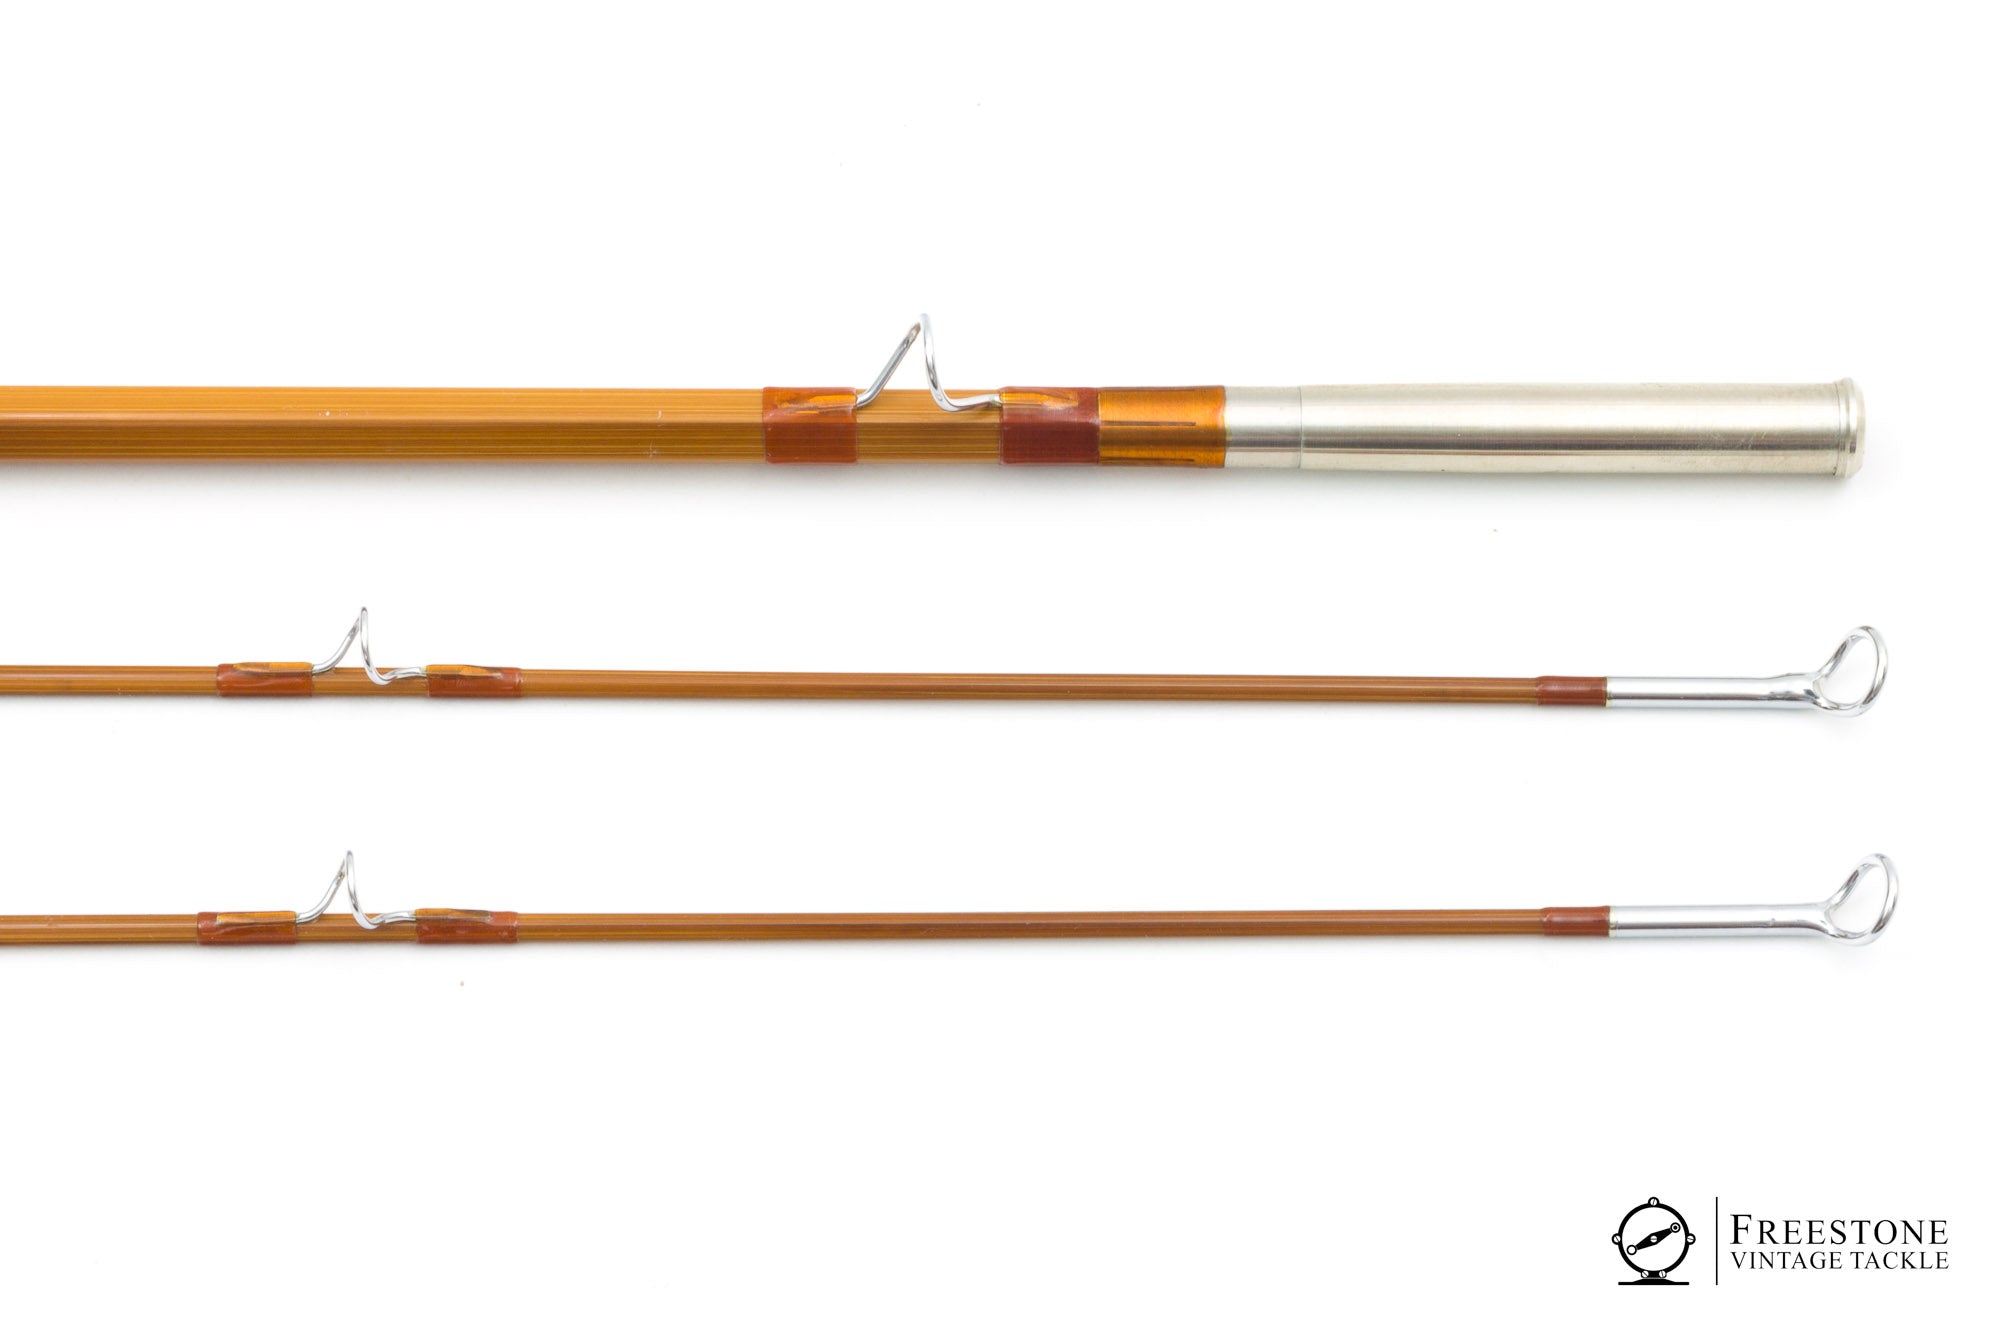 Maurer, George (Sweet Water Rods) - Trout Bum 8' 2/2 5wt Bamboo Rod -  Freestone Vintage Tackle